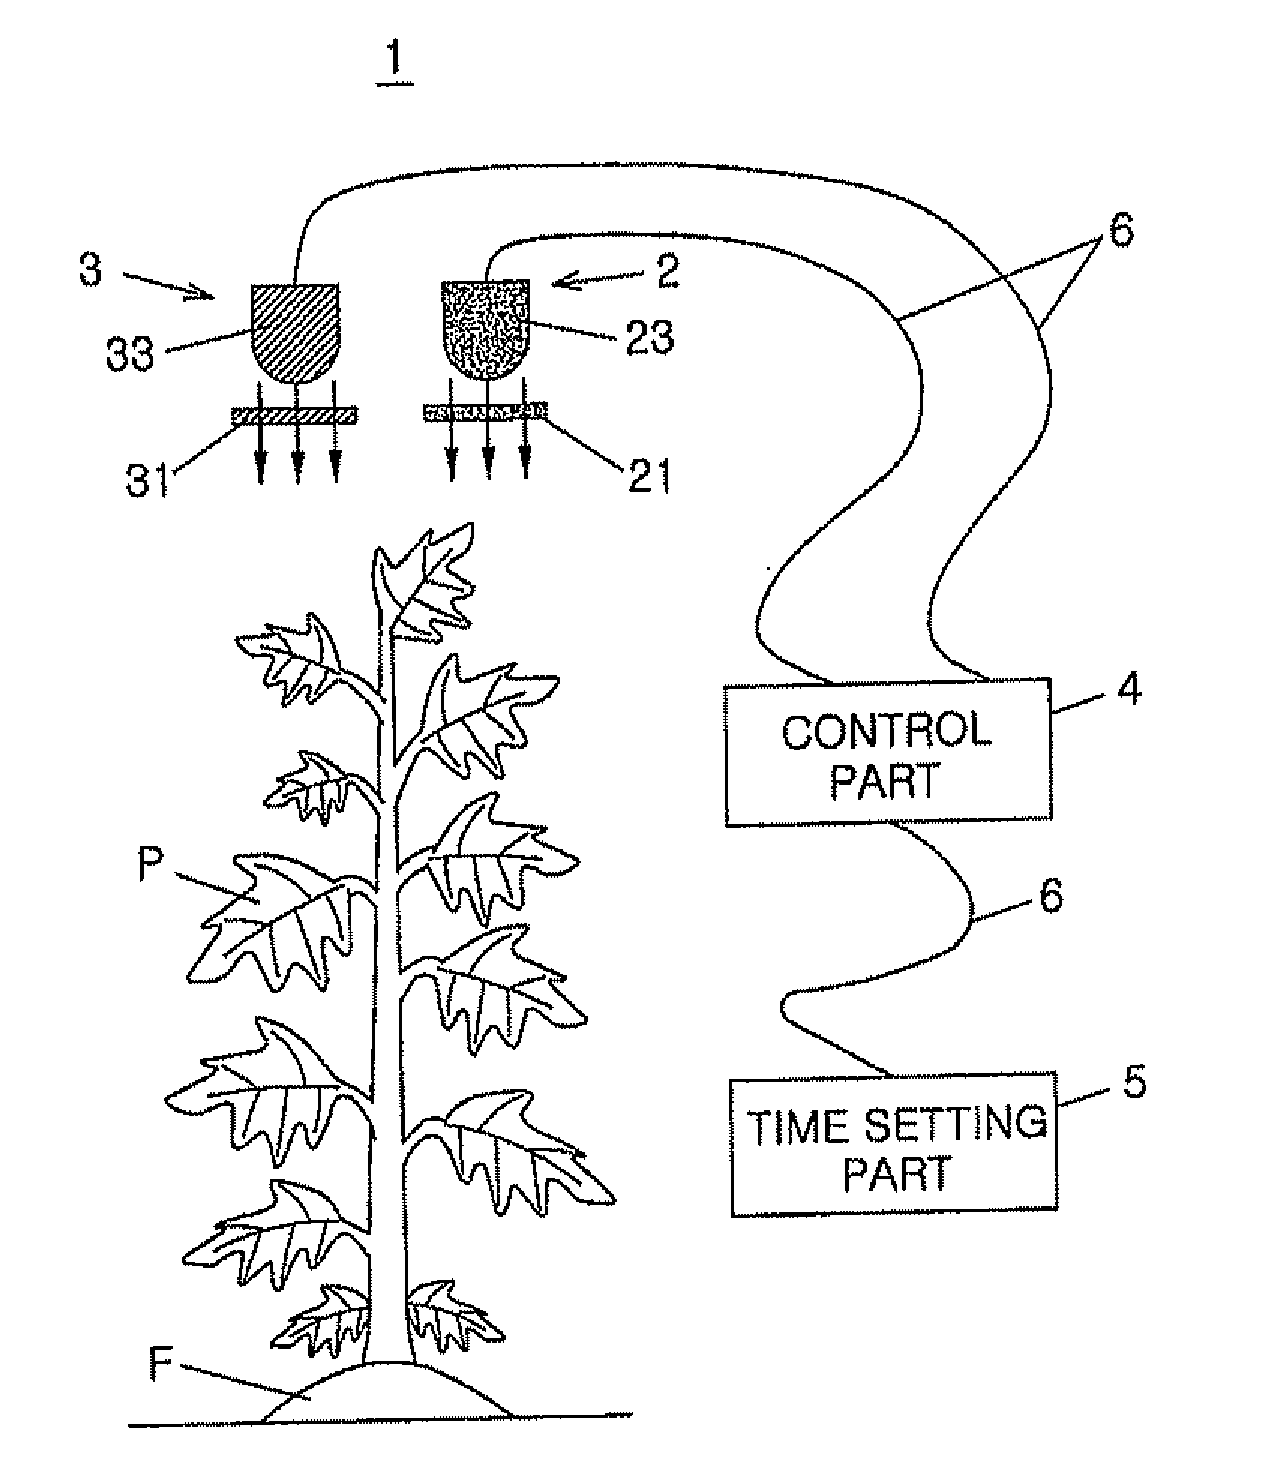 Plant growing system